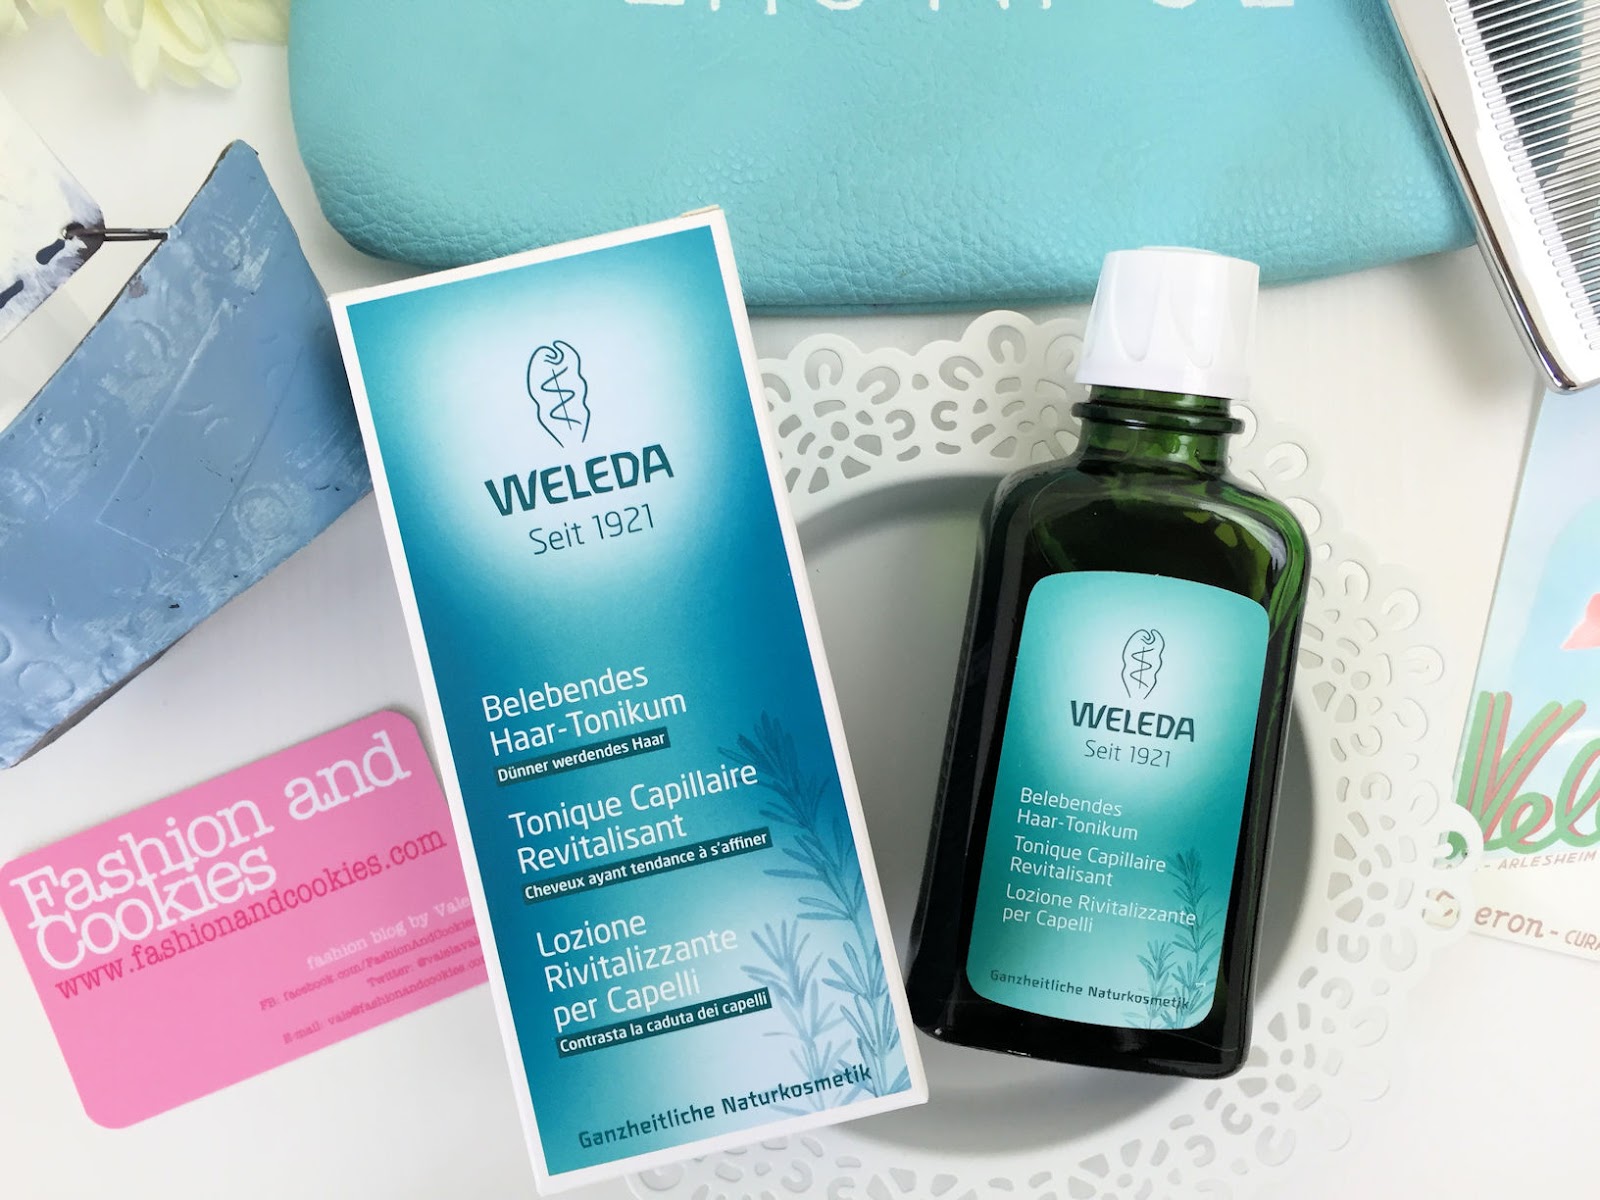 Make hair grow faster with Weleda revitalising hair tonic, read my review on Fashion and Cookies beauty blog, beauty blogger